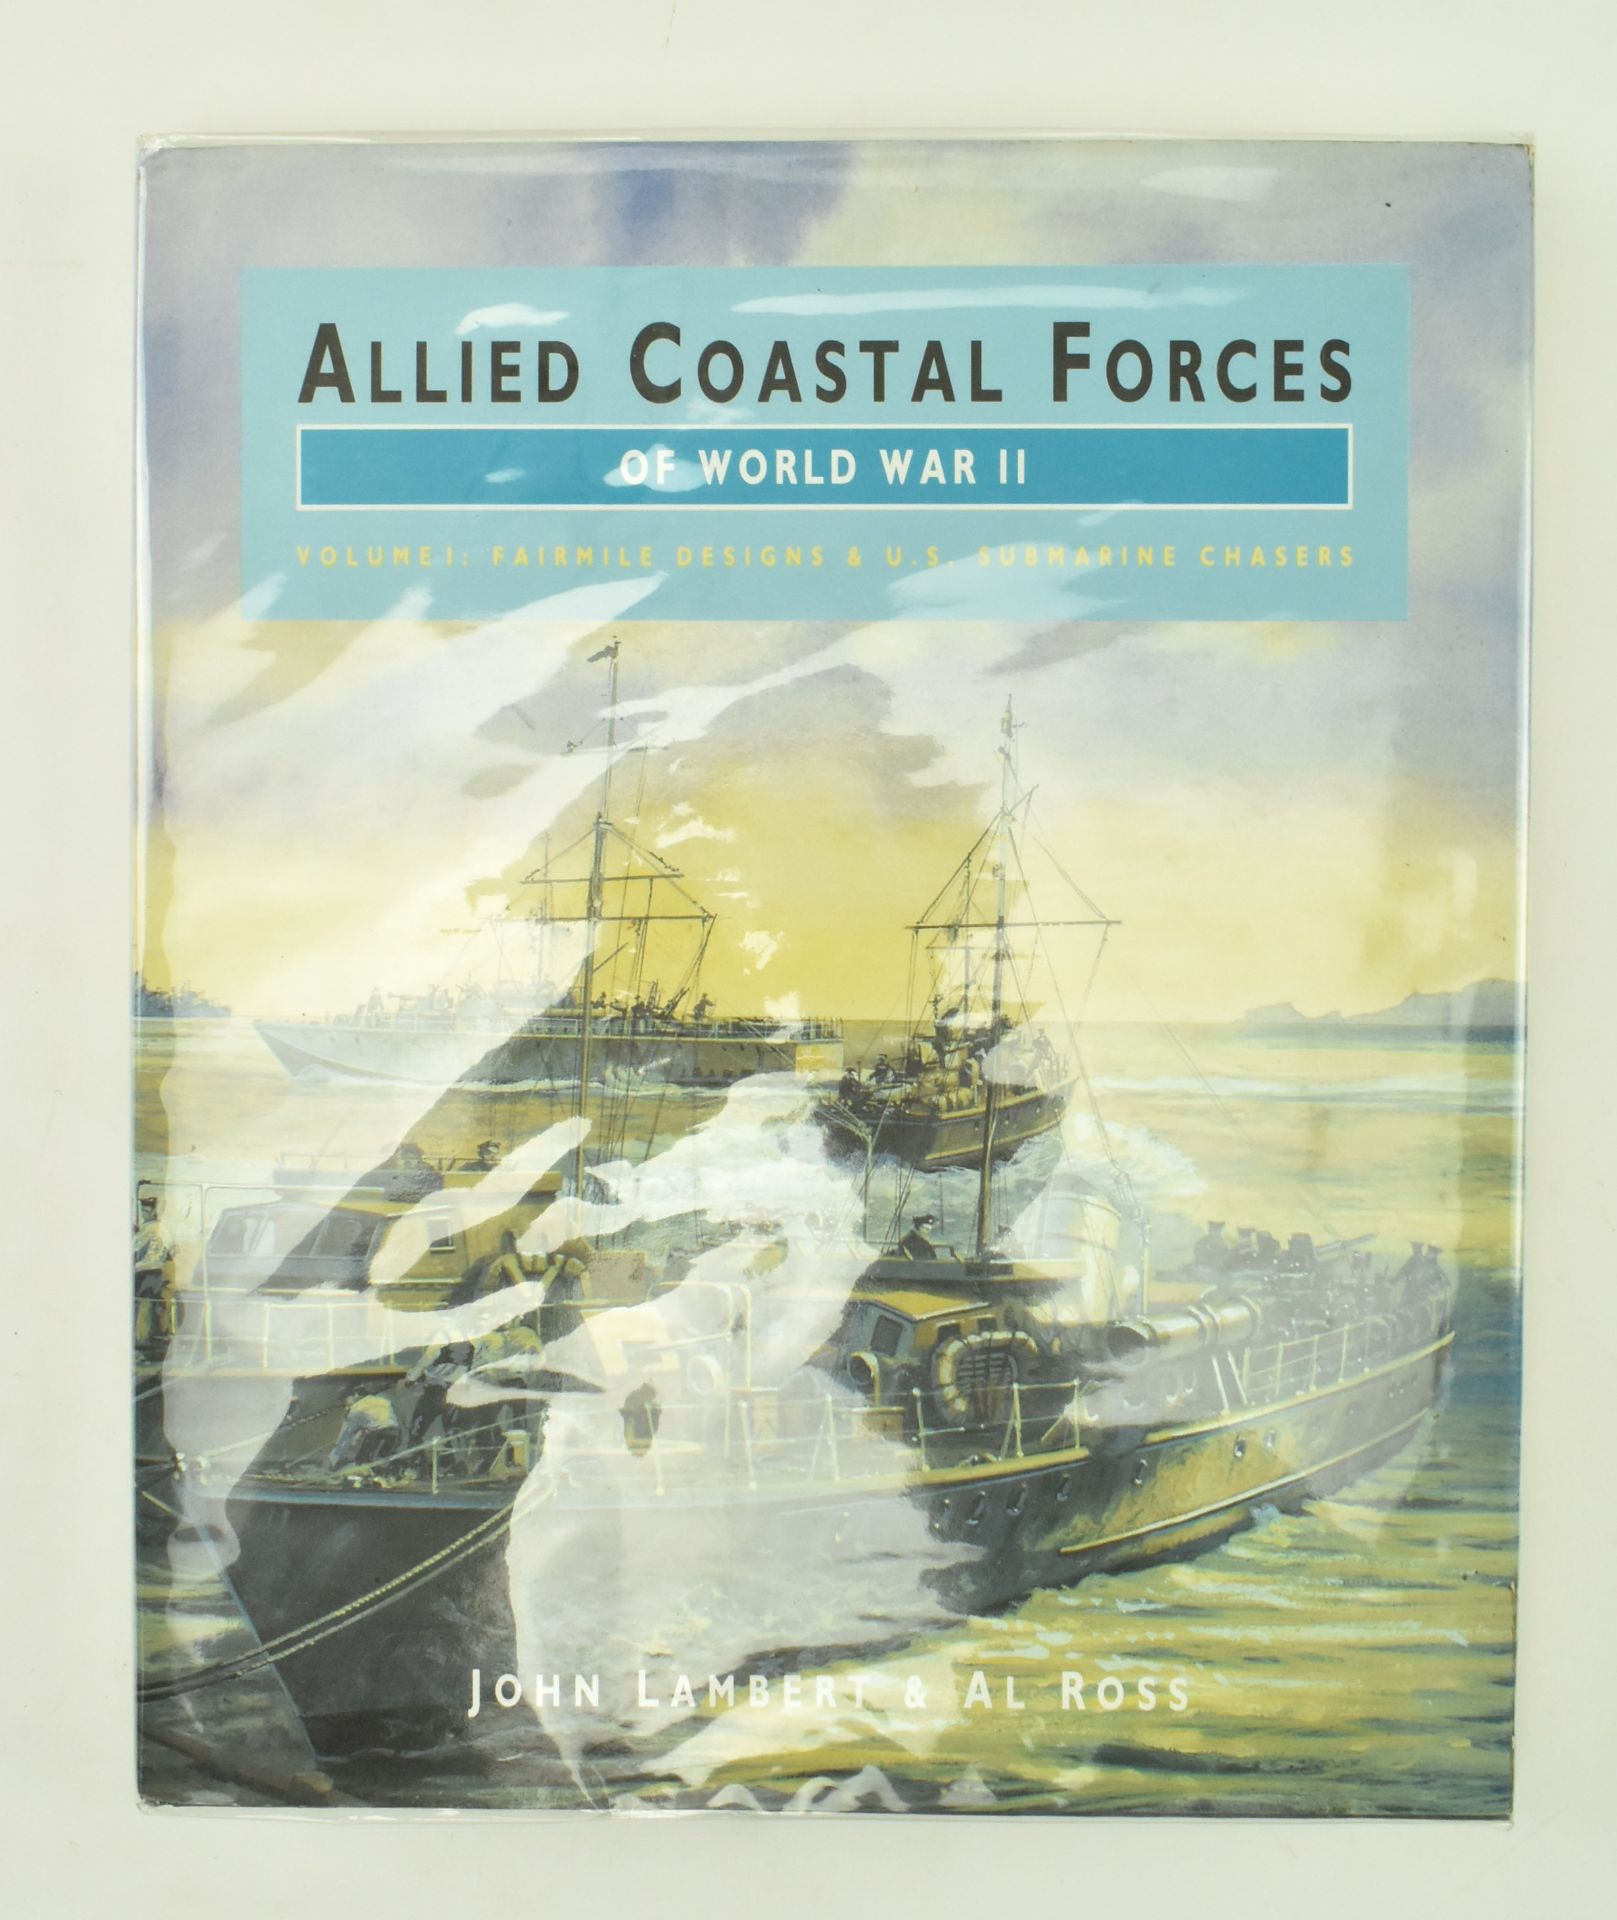 MILITARY INTEREST. COLLECTION OF MODERN REFERENCE BOOKS - Image 7 of 12